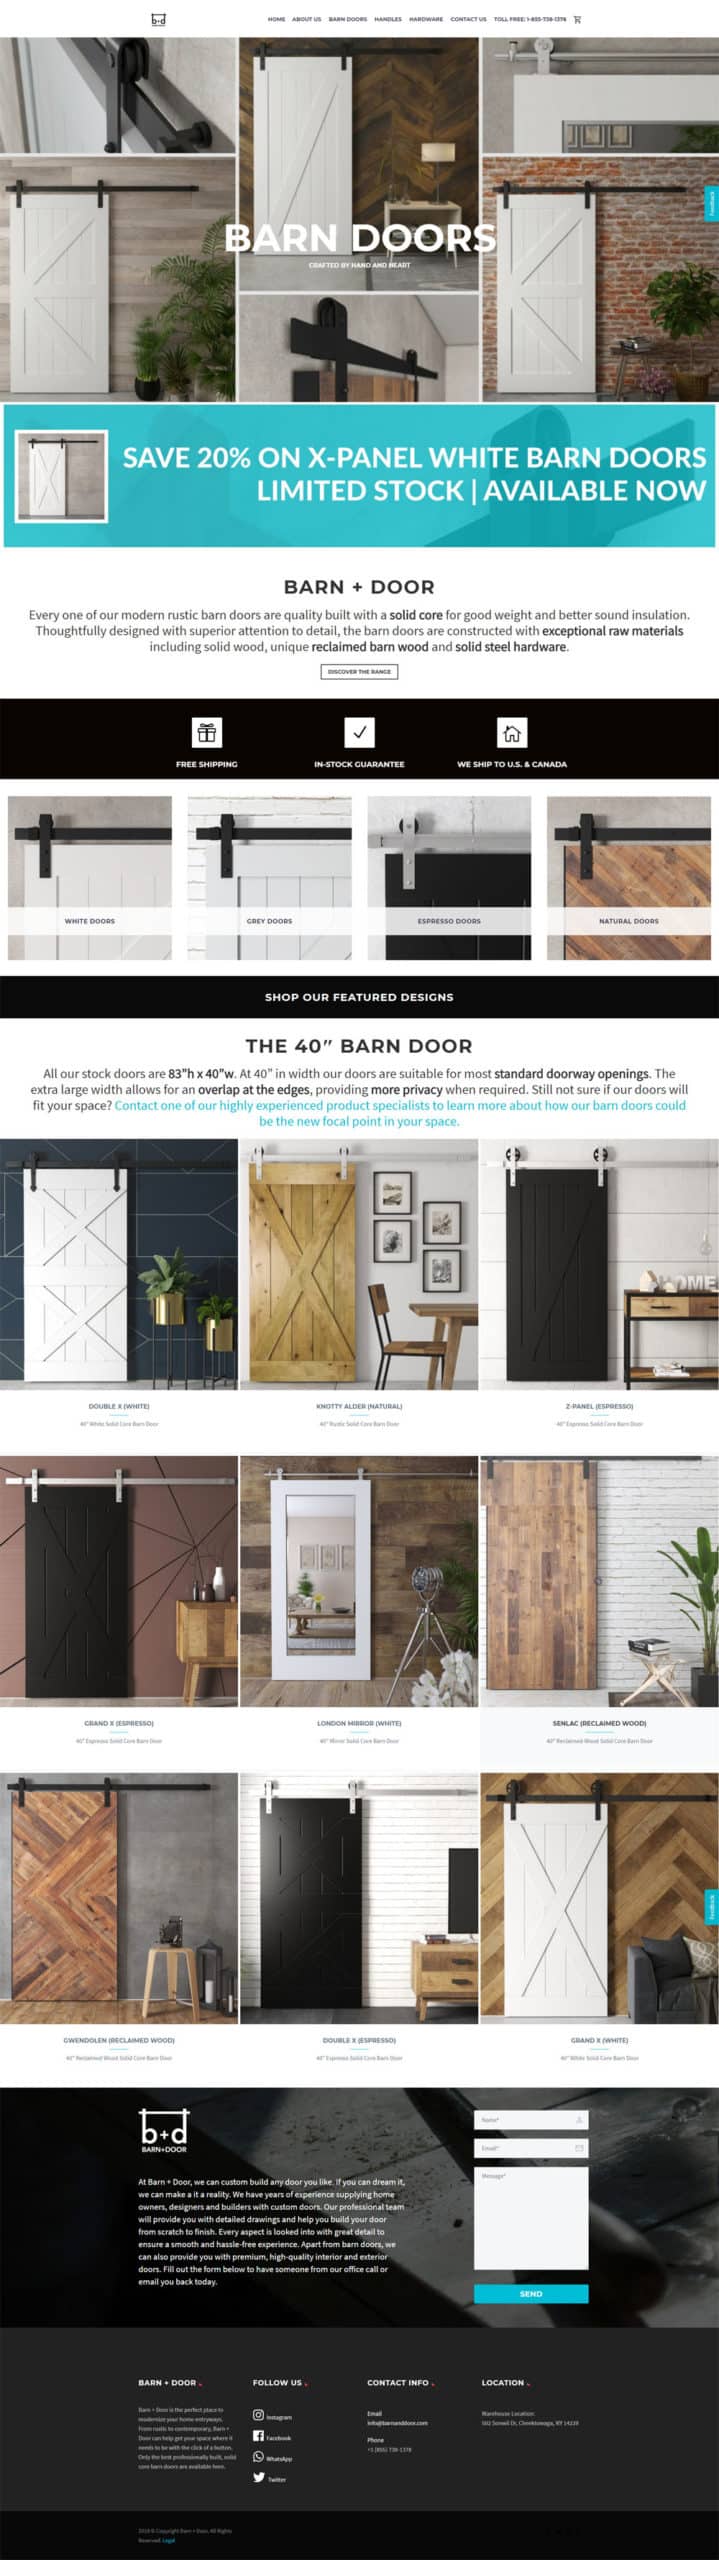 barn doors entire page scaled